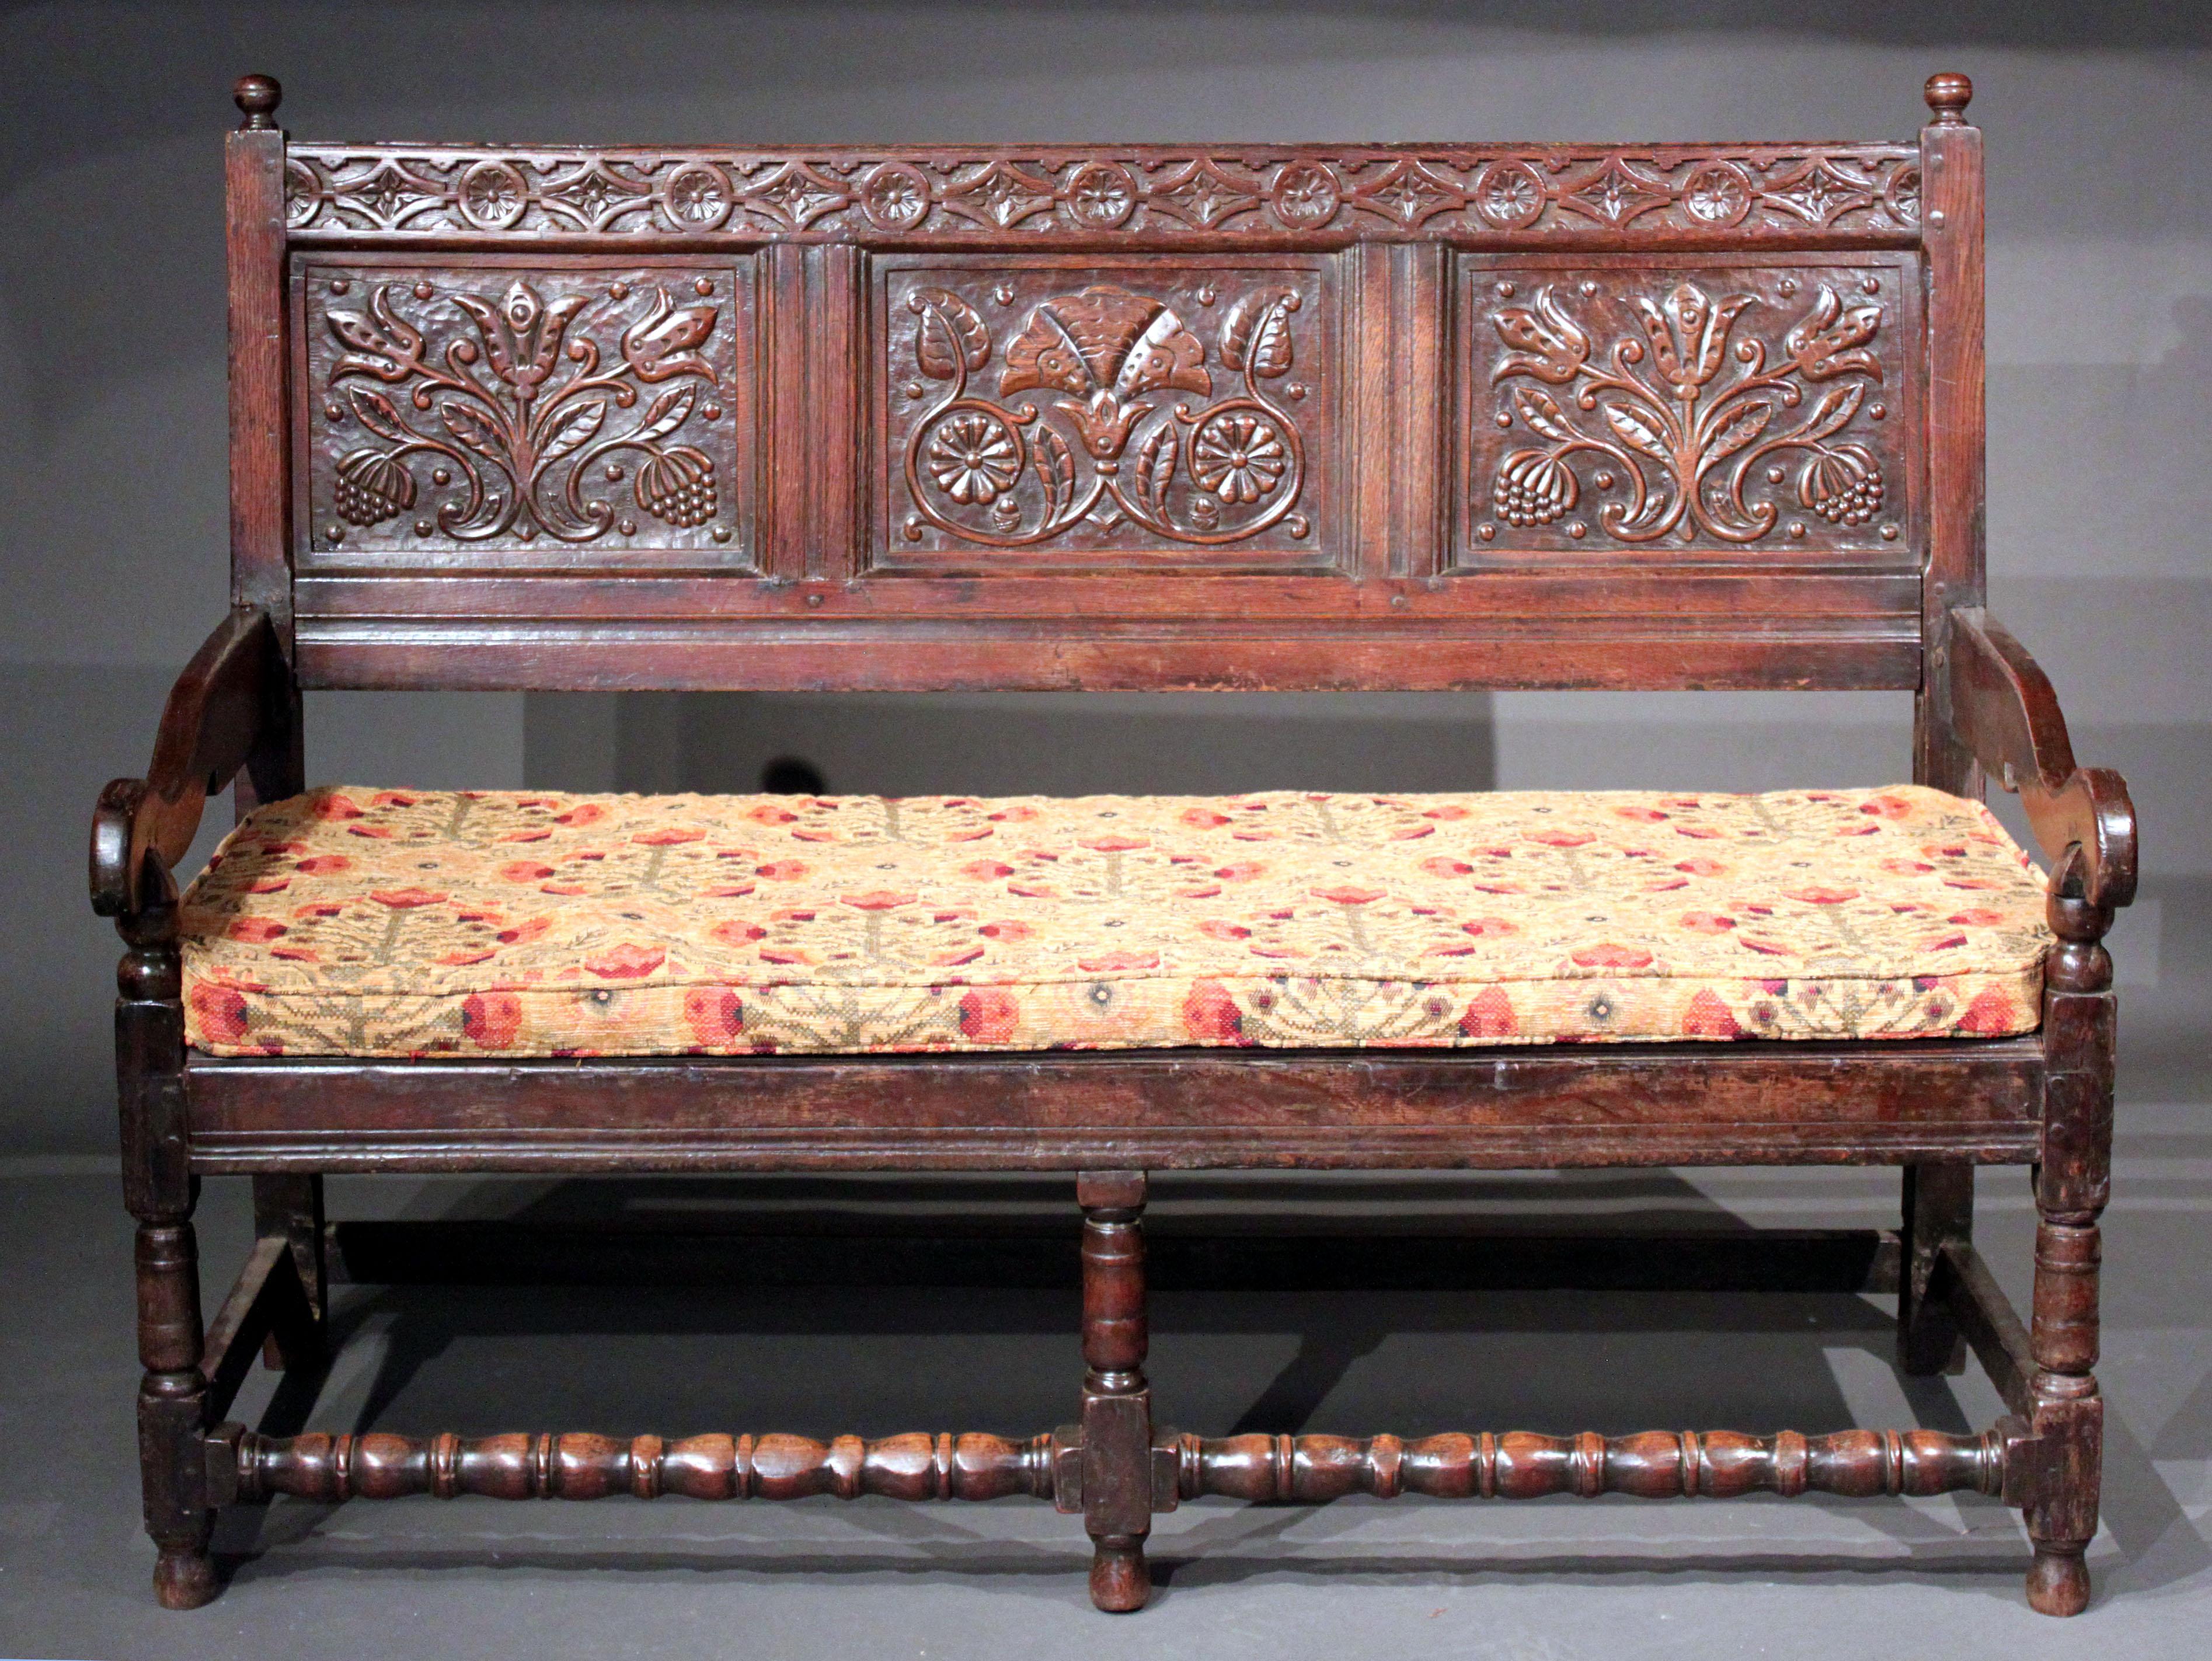 A late 17th century oak settle with well carved back and good original colour and patina; small restorations including a repaired chip and metal brackets under the front seat rail, recent tongue and grove boarding under the seat; it might originally